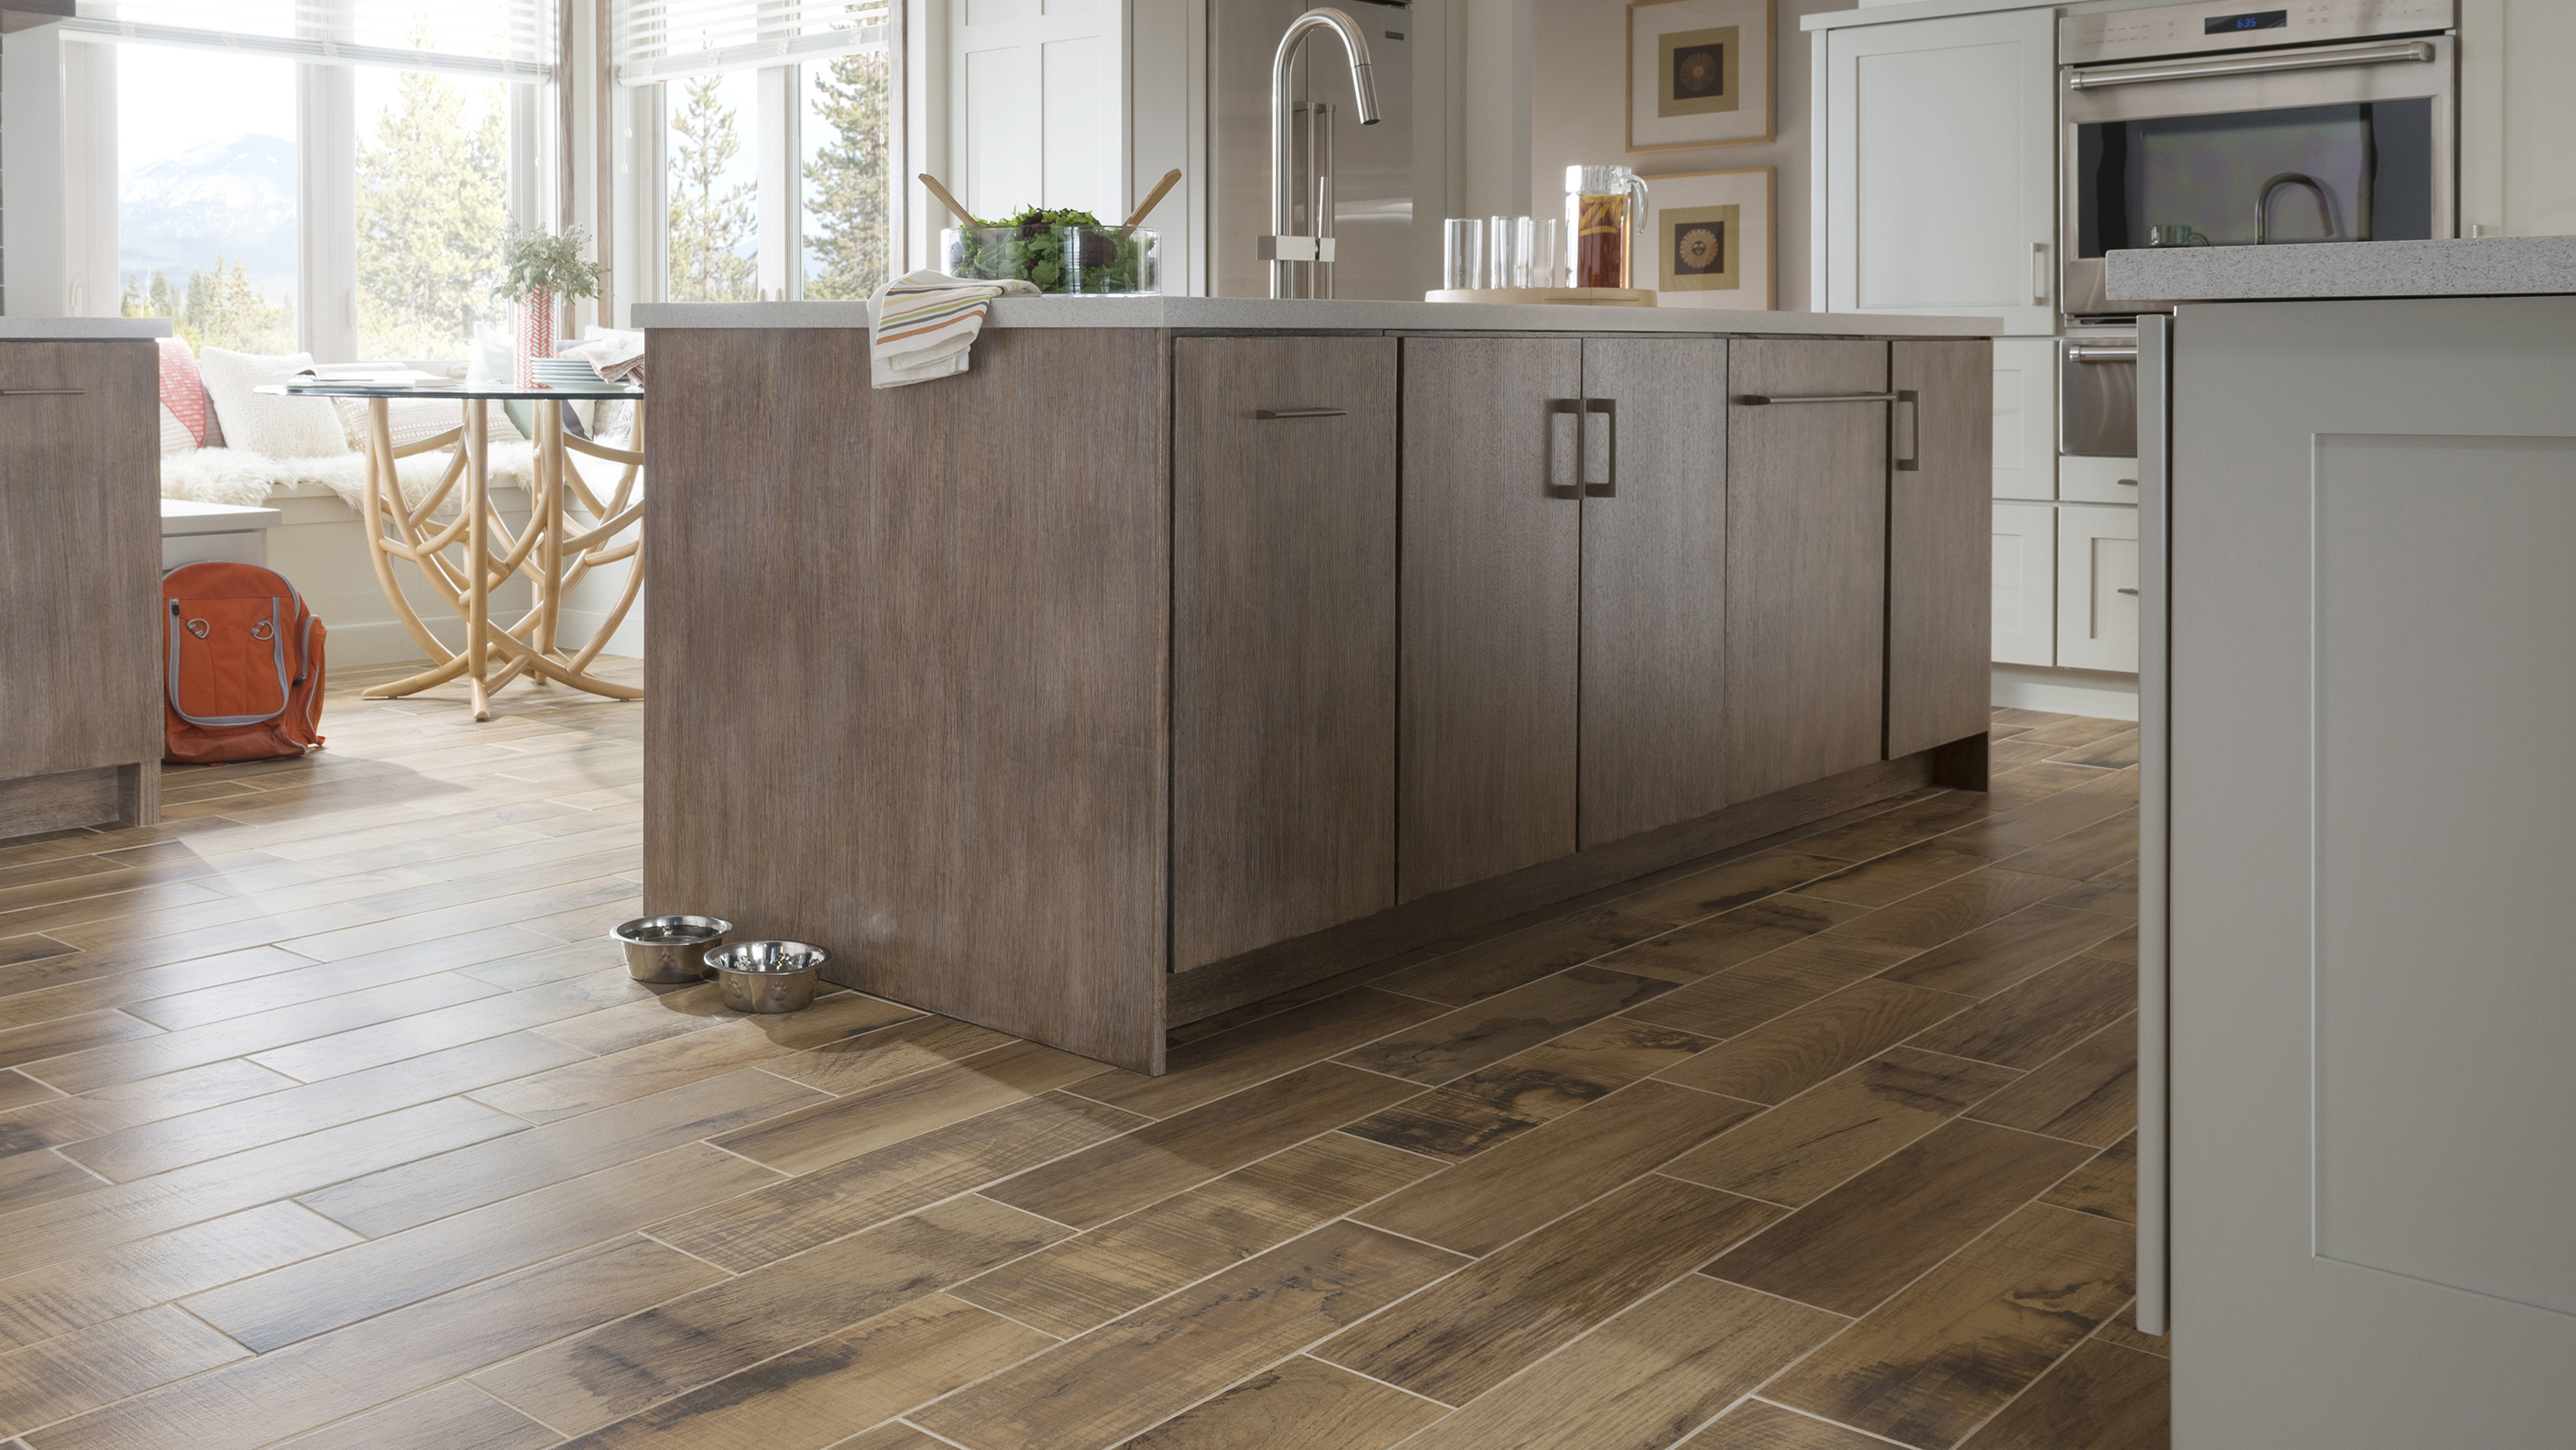 Wood-look tile in a kitchen, installation services available.